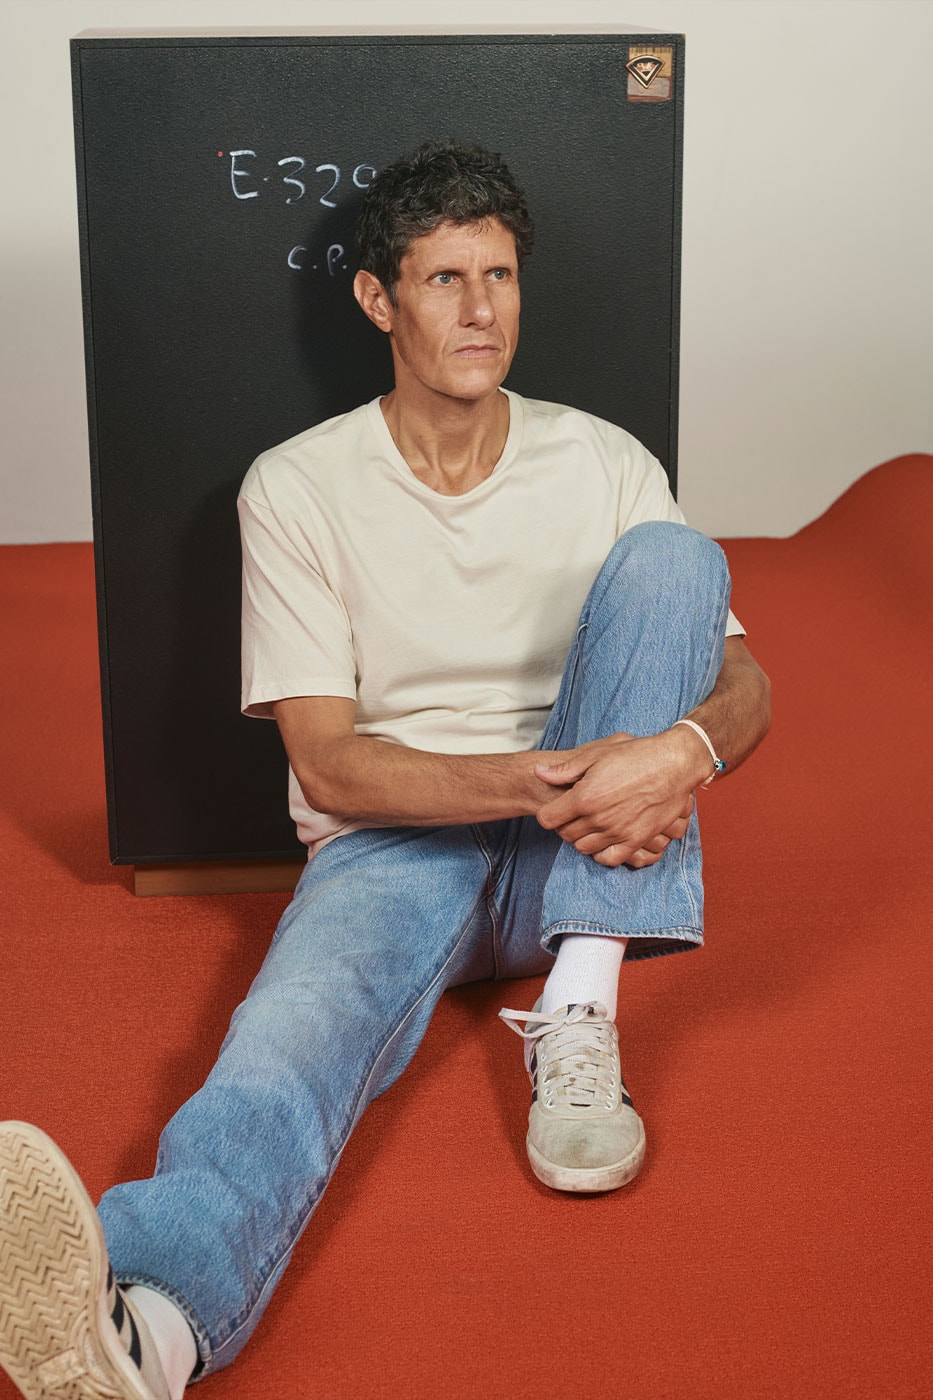 Levis 501 90s The Number that Changed Everything Campaign Collection Release Info Featuring Kid Cudi Tremaine Emory Beastie Boys Mike D Nathan Westling Gia Seo Gabriella Karefa-Johnson Staz Lindes